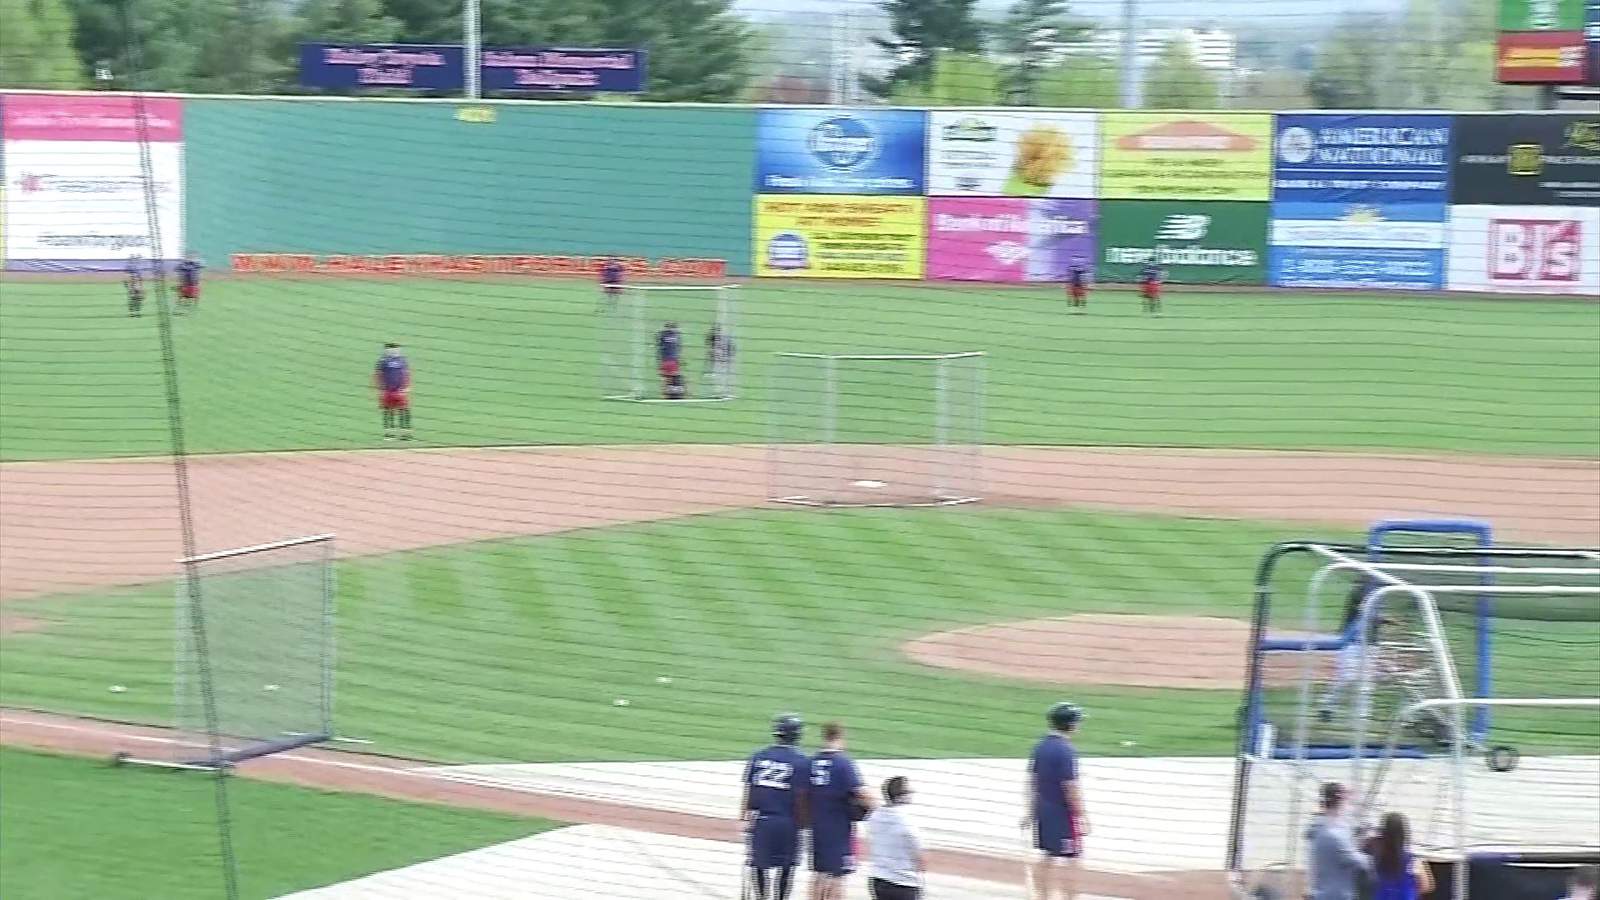 Salem Red Sox field crew keeping it business as usual